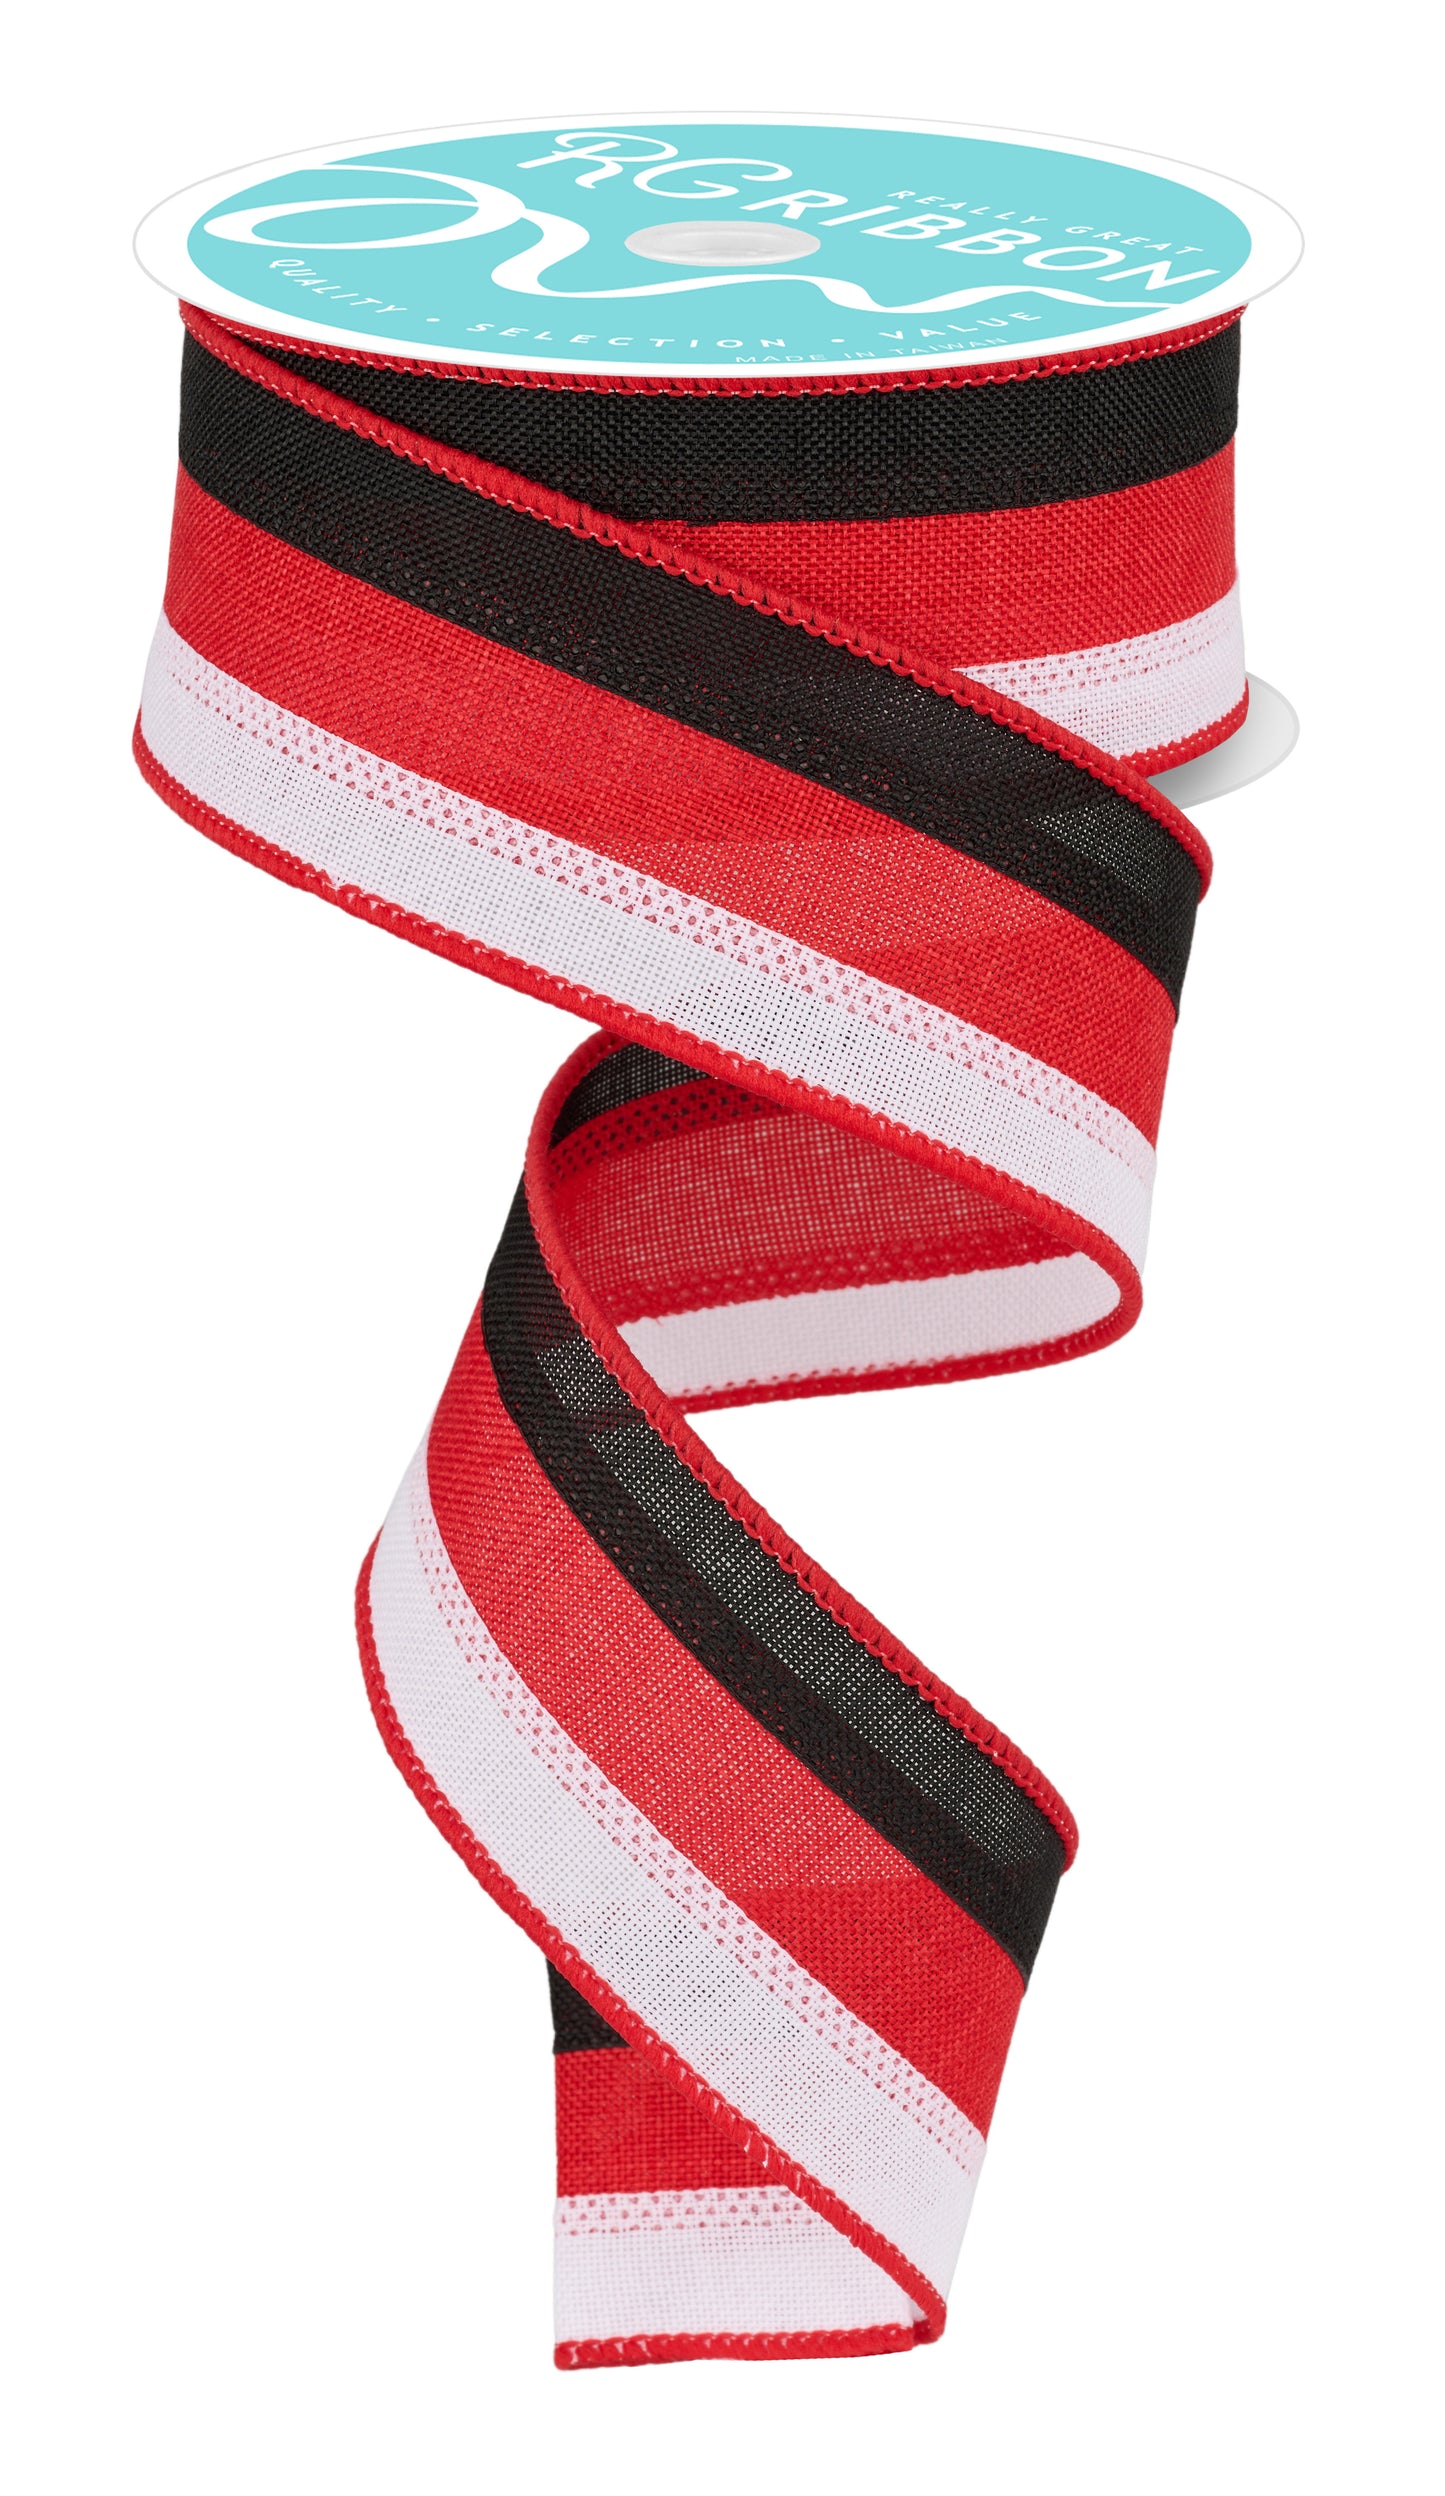 Wired Ribbon * 3 in 1 Color * Black/Red/White Canvas * 1.5" x 10 Yards * RG01601CM